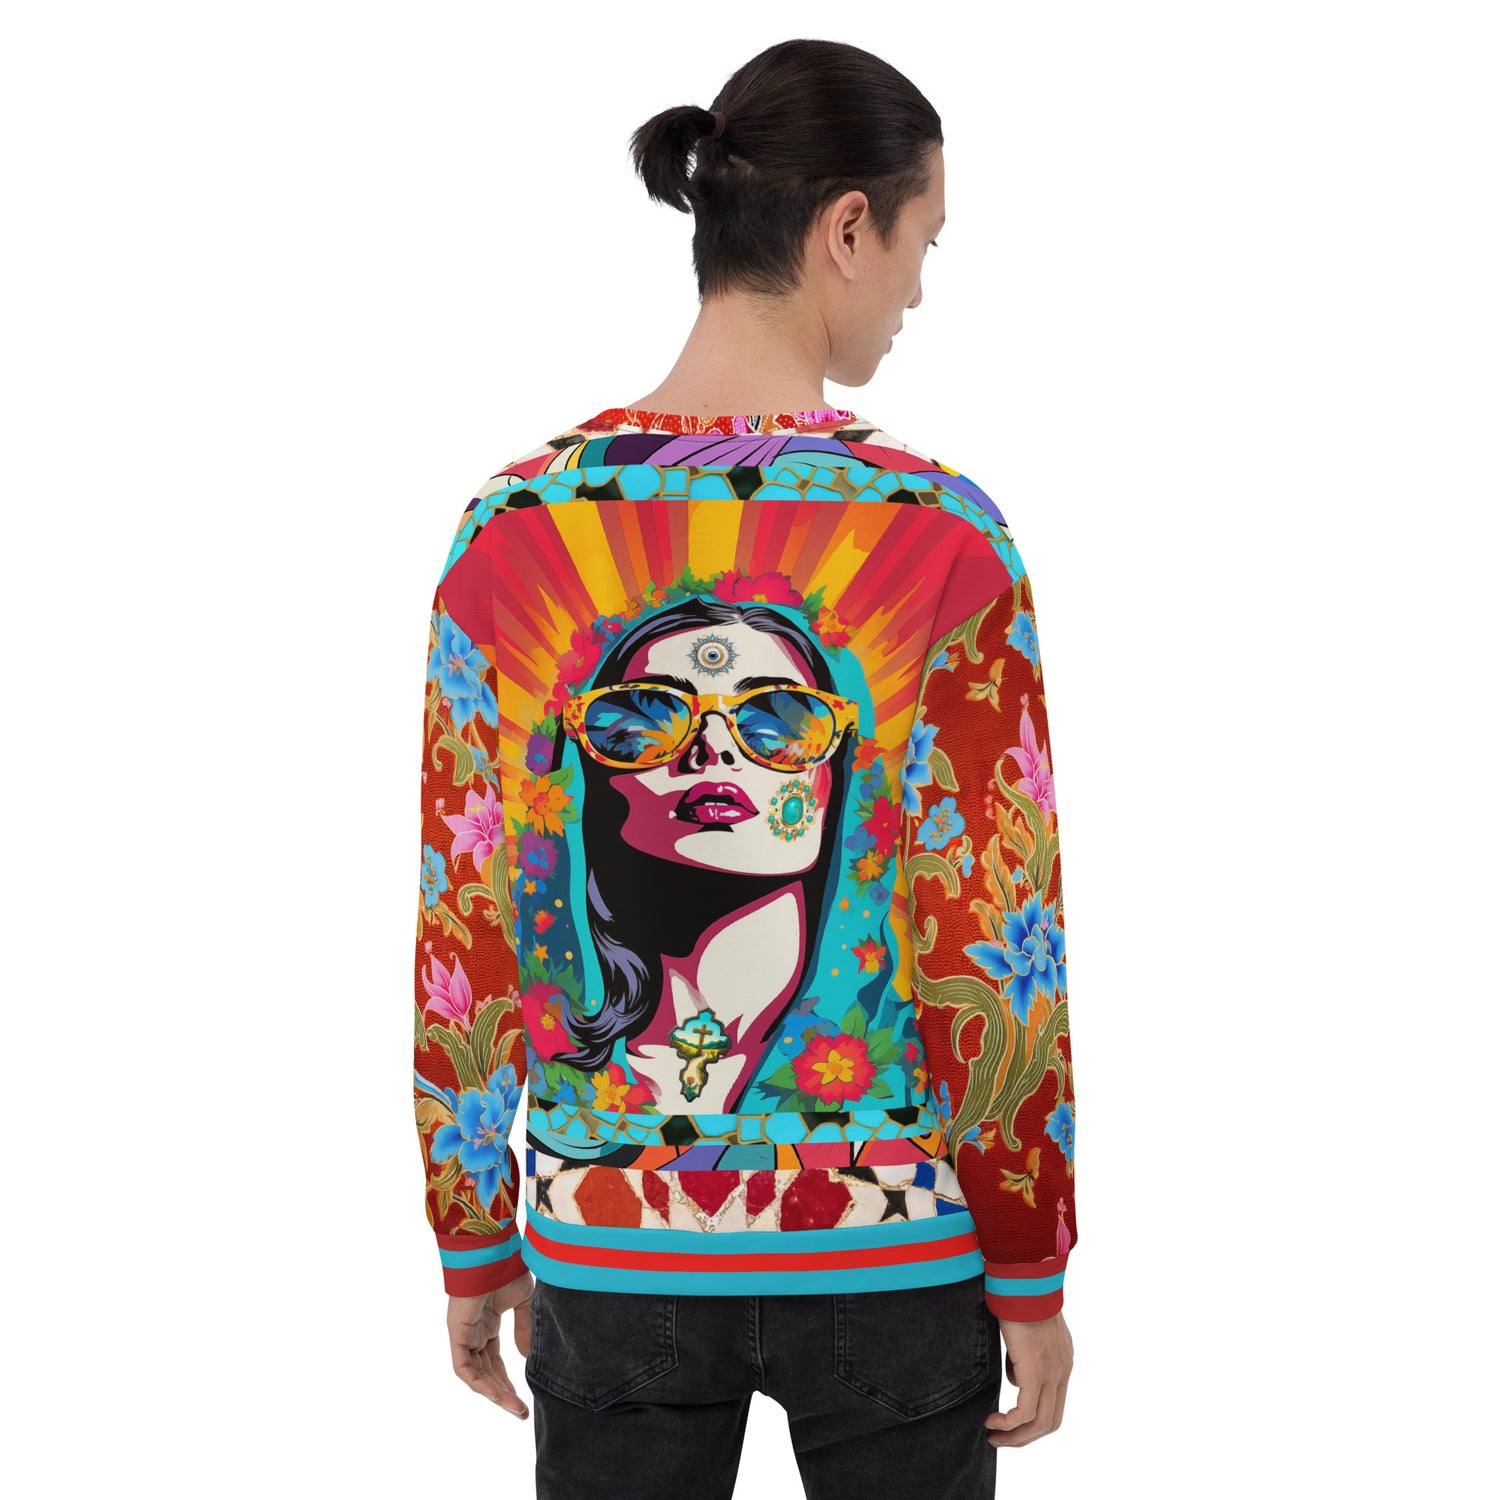 JC Superstar of the 5th Dimension Eco-Poly Summer Weight Unisex Sweatshirt